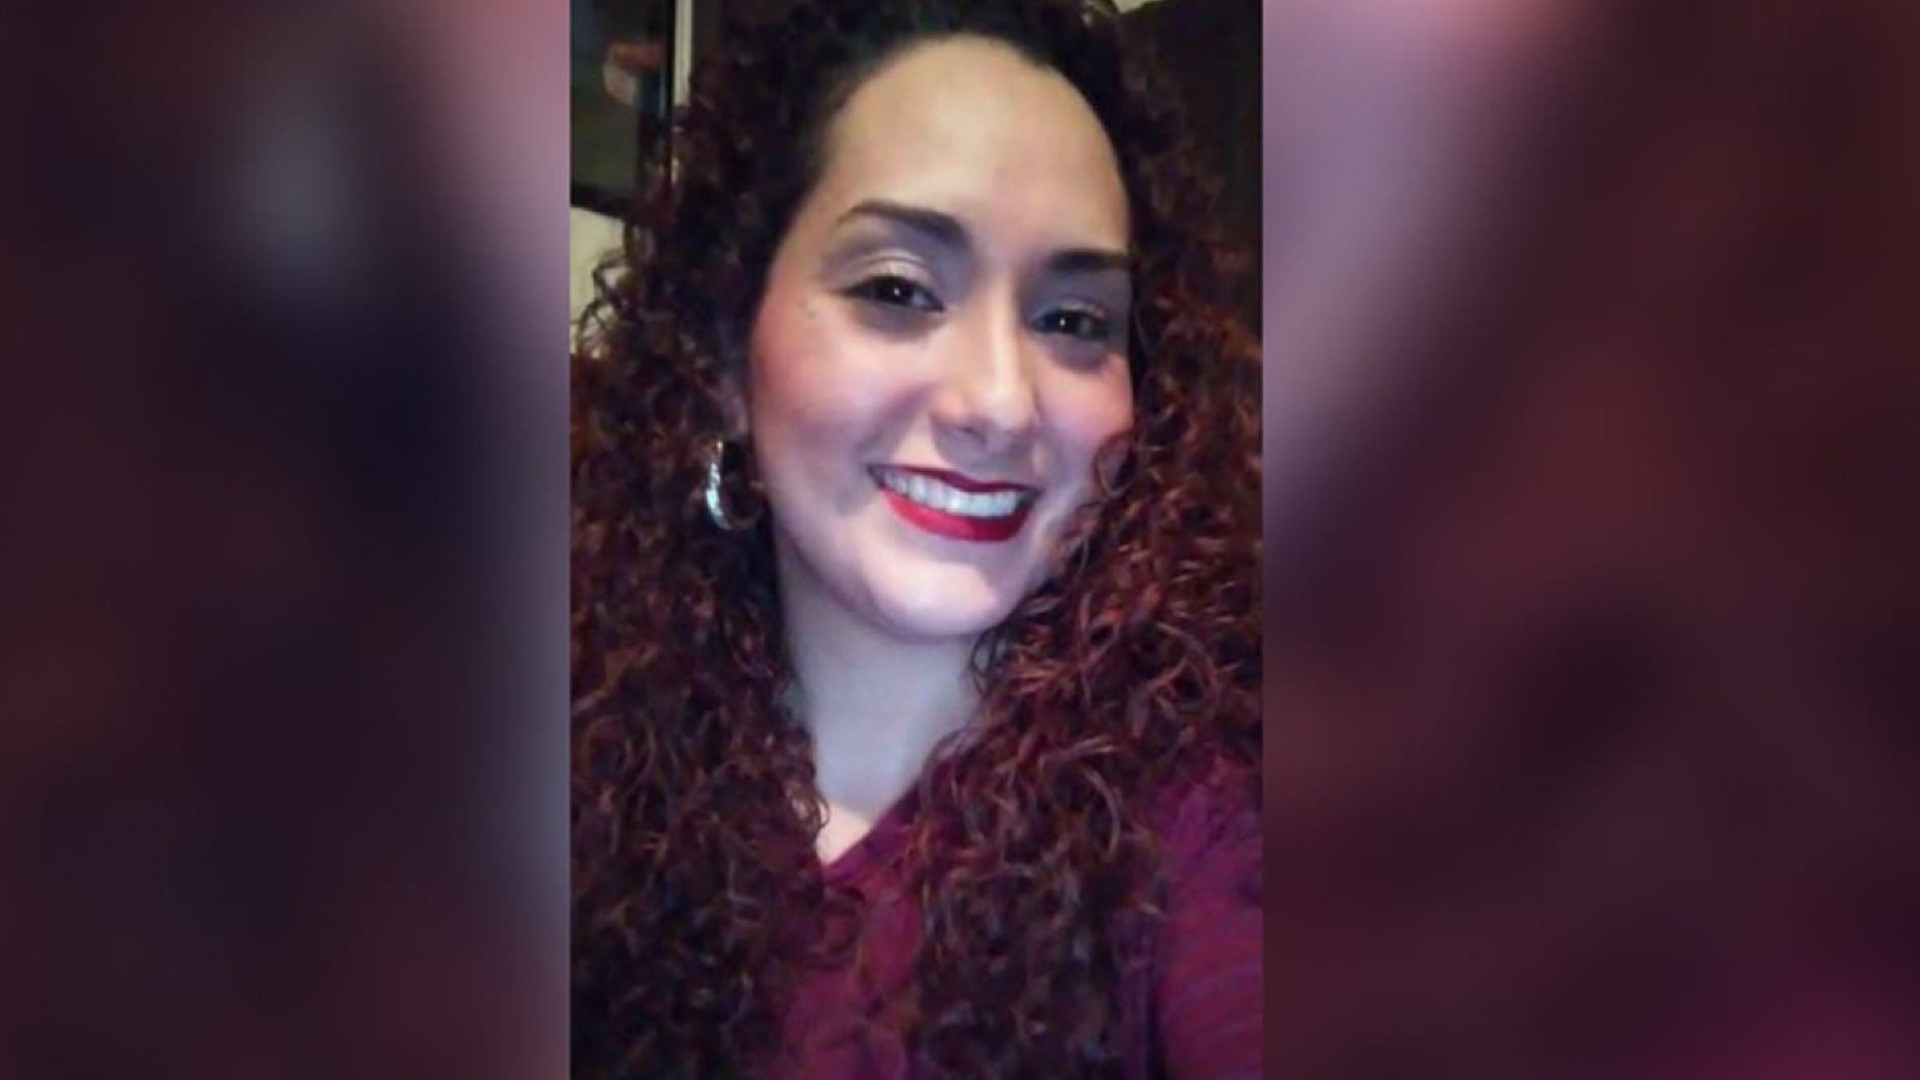 32-year-old Nikki Barrera Garza is now back home continuing her recovery after a terrible accident that occurred last month.